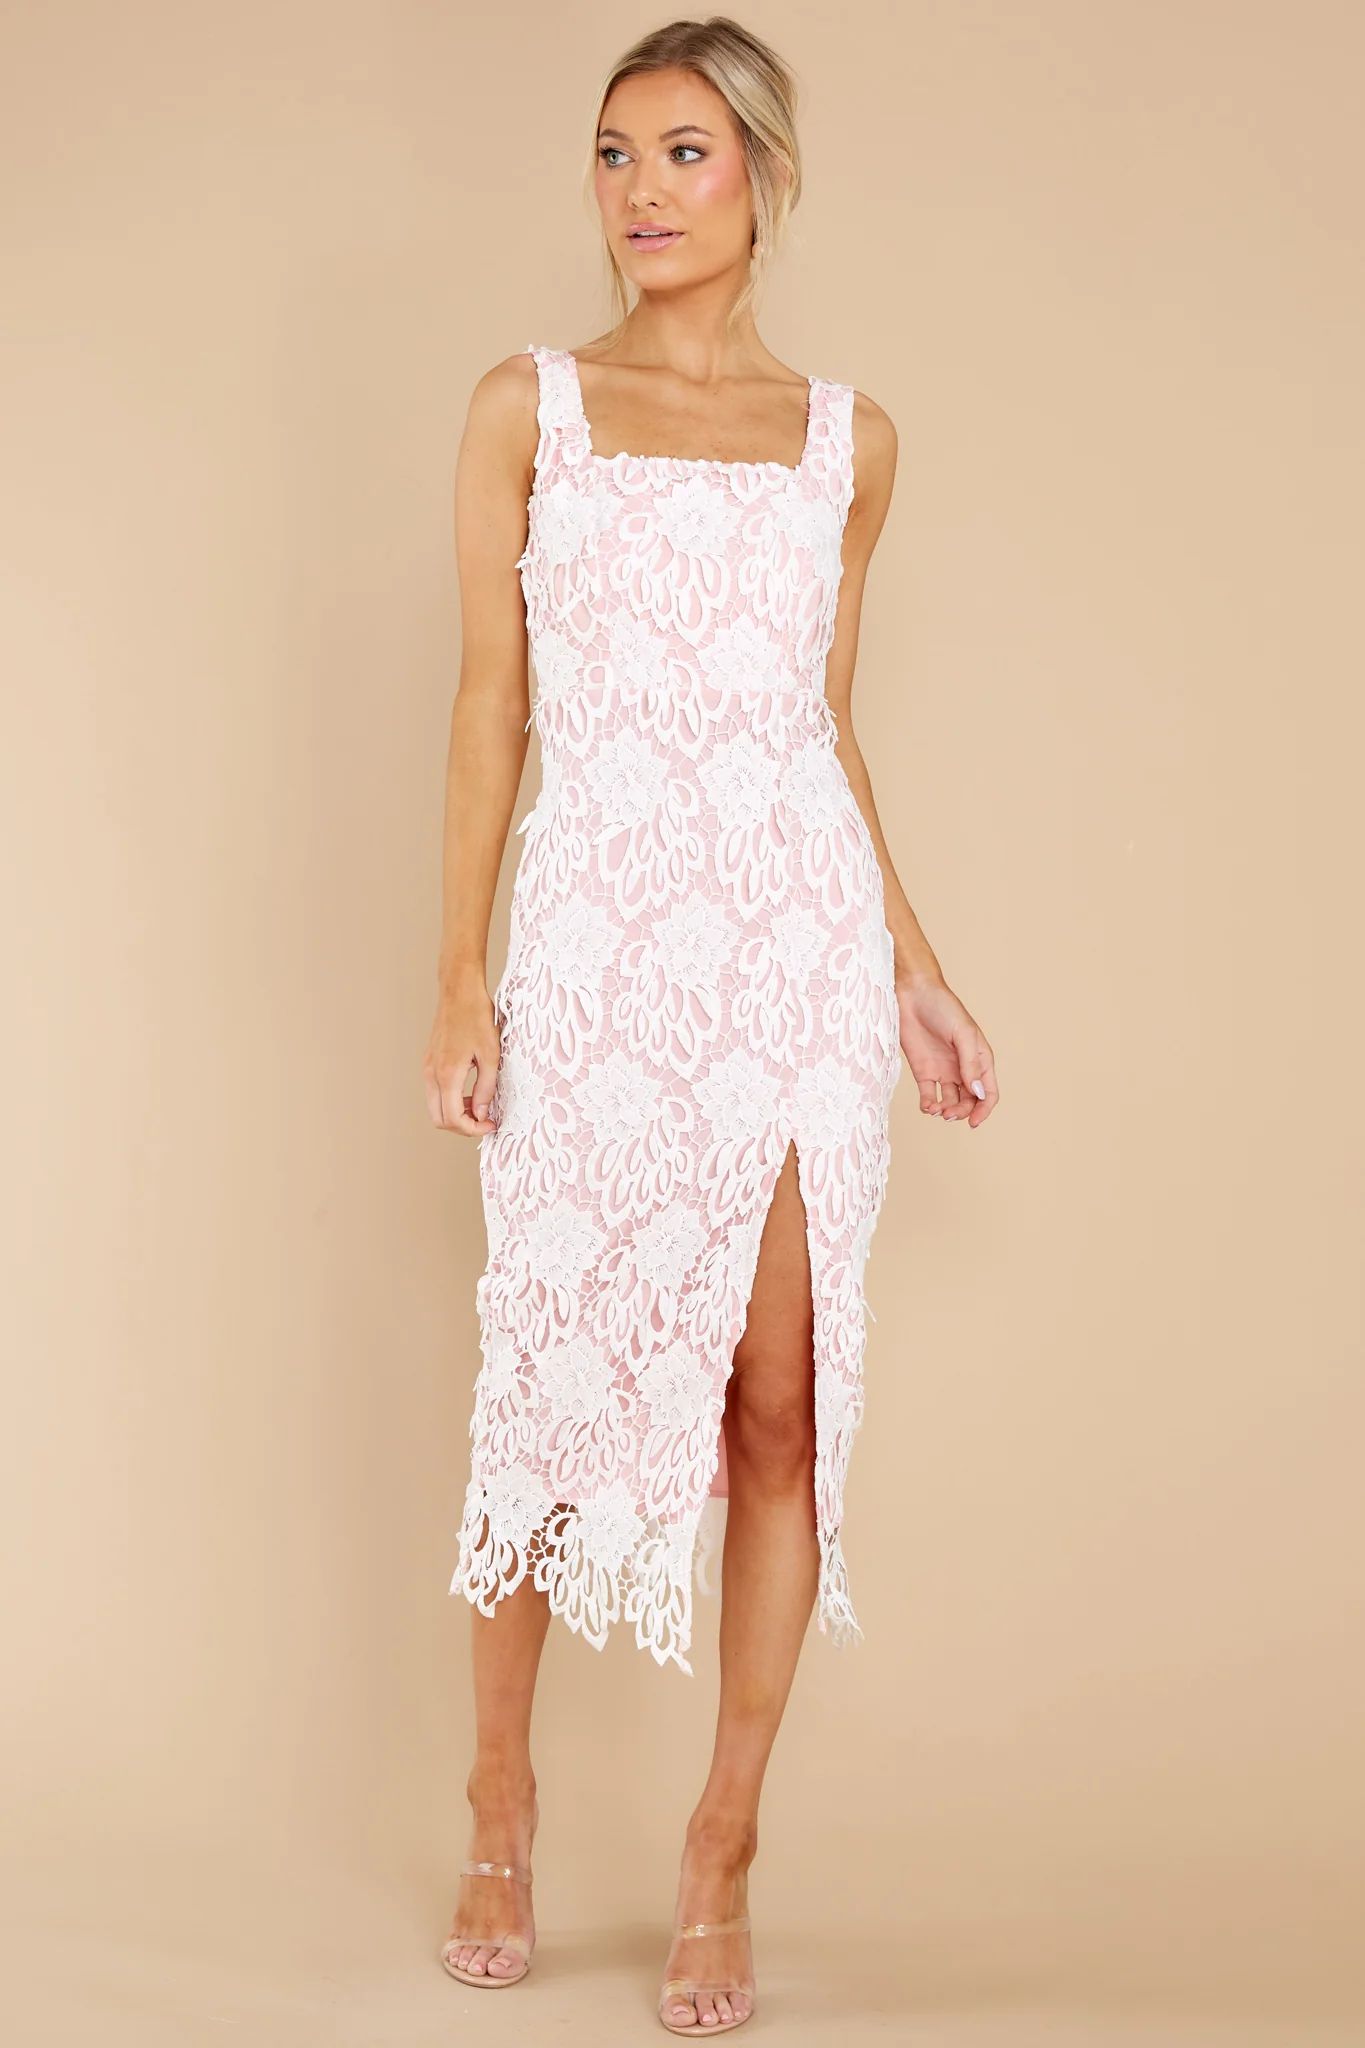 Own The Room Pink Lace Midi Dress | Red Dress 